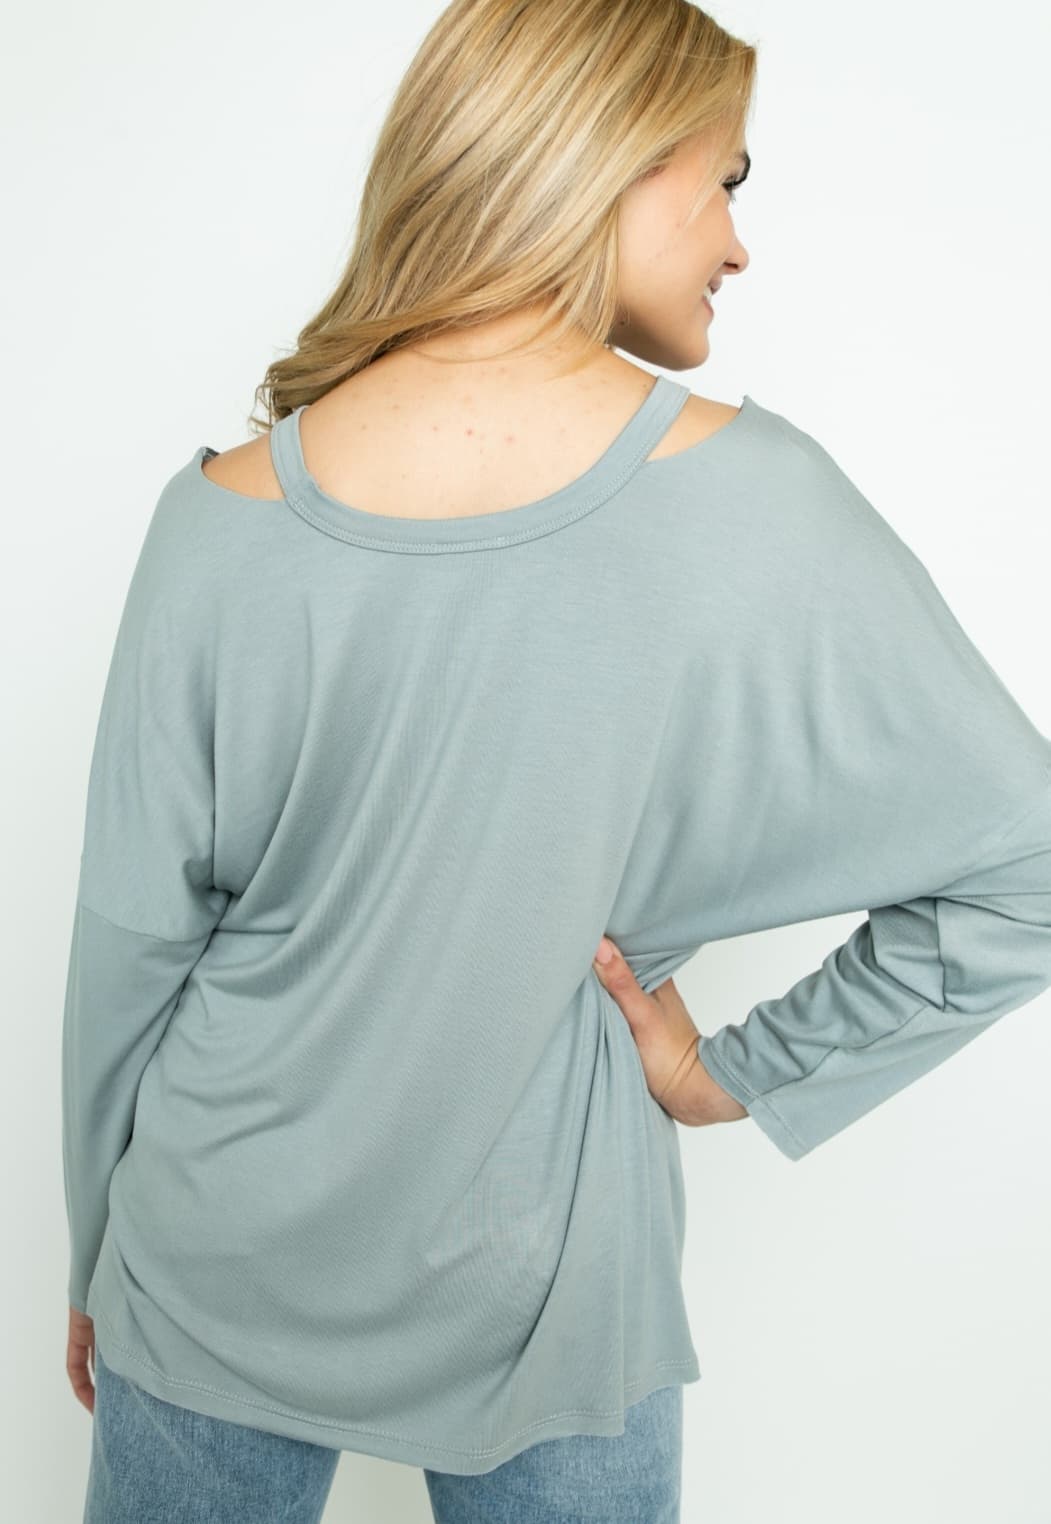 Soft Grey flowing shirt with Skull in Regular and Plus sizes